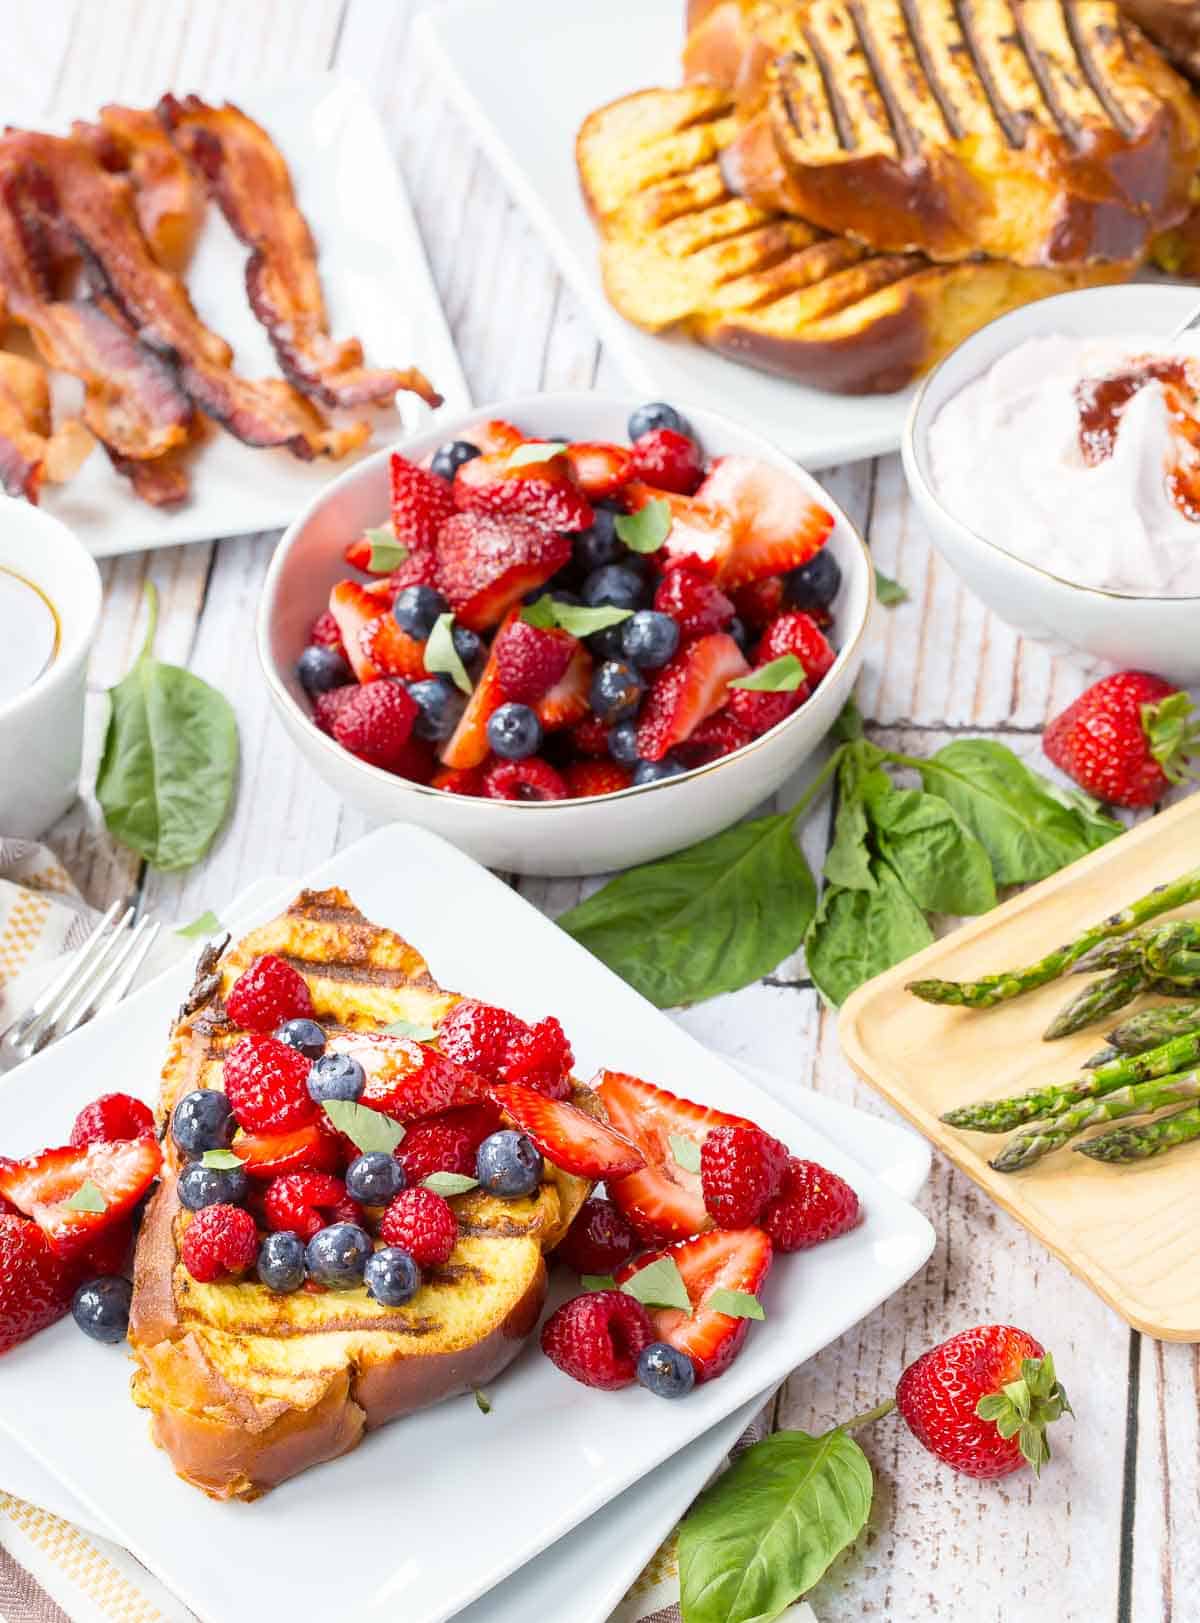 Slices of grilled French toast on a square plate garnished with mixed berries, next to a bowl of berries, a plate of bacon, and more French toast in the background.